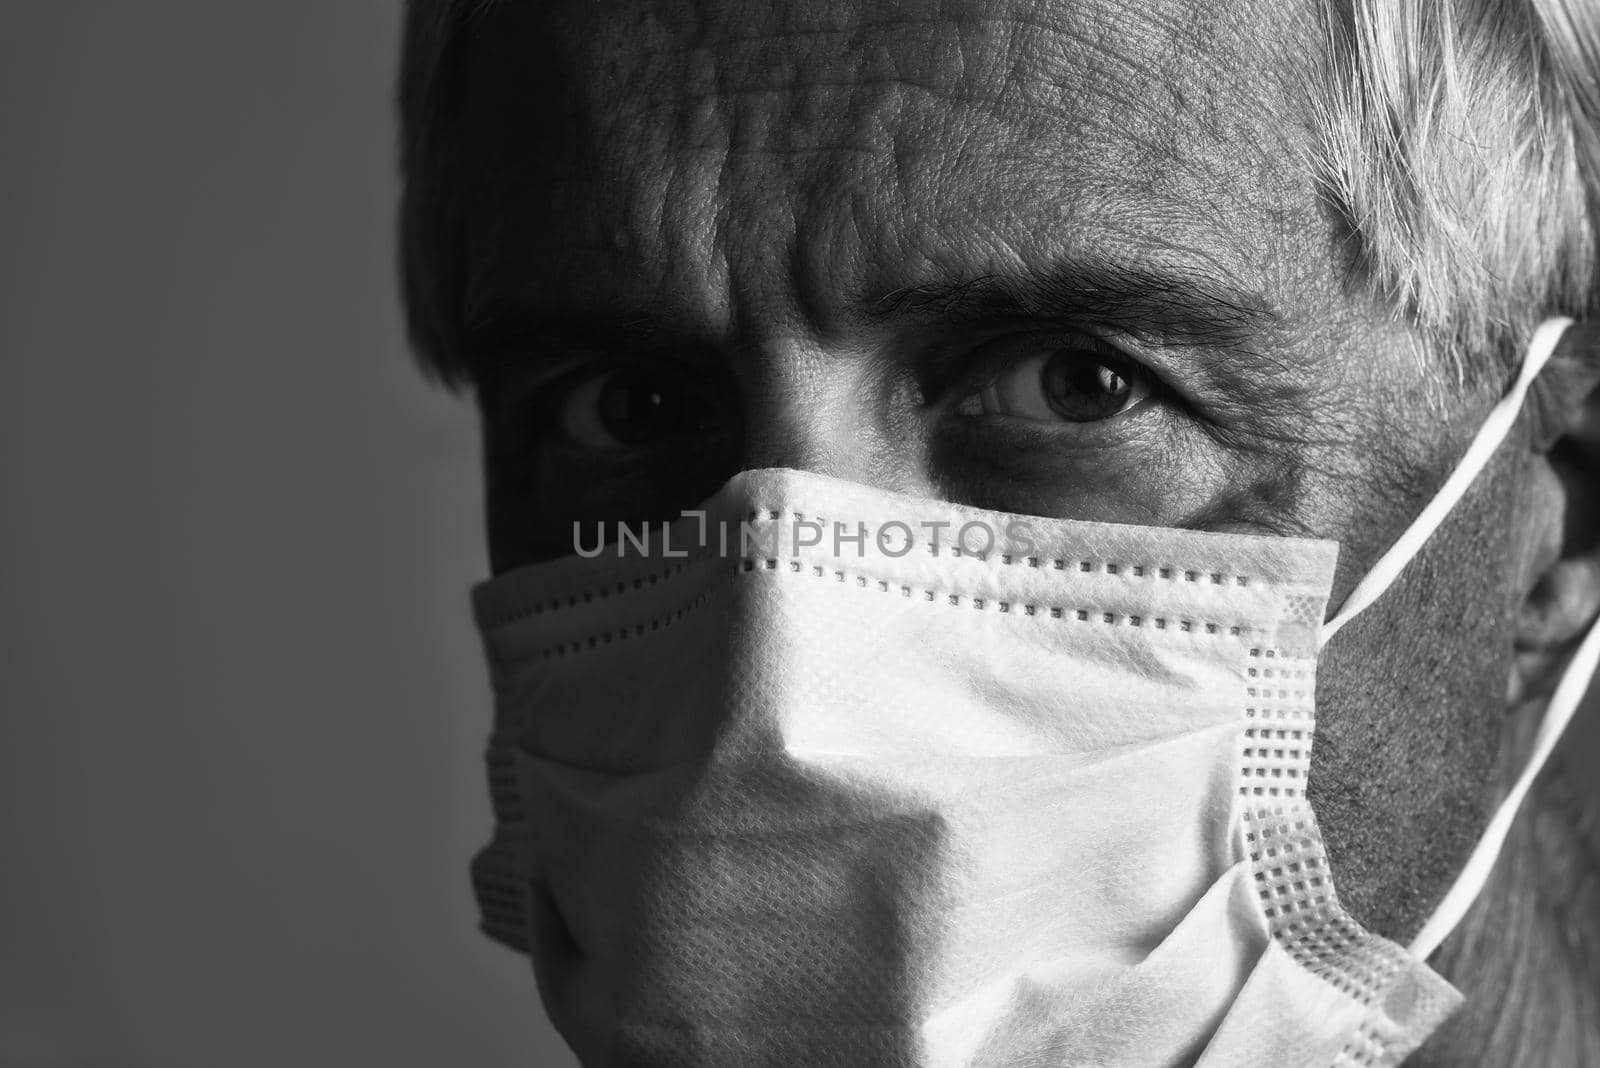 Closeup of a man wearing a Covid-19 protective face mask during the Coronavirus pandemic. by sCukrov